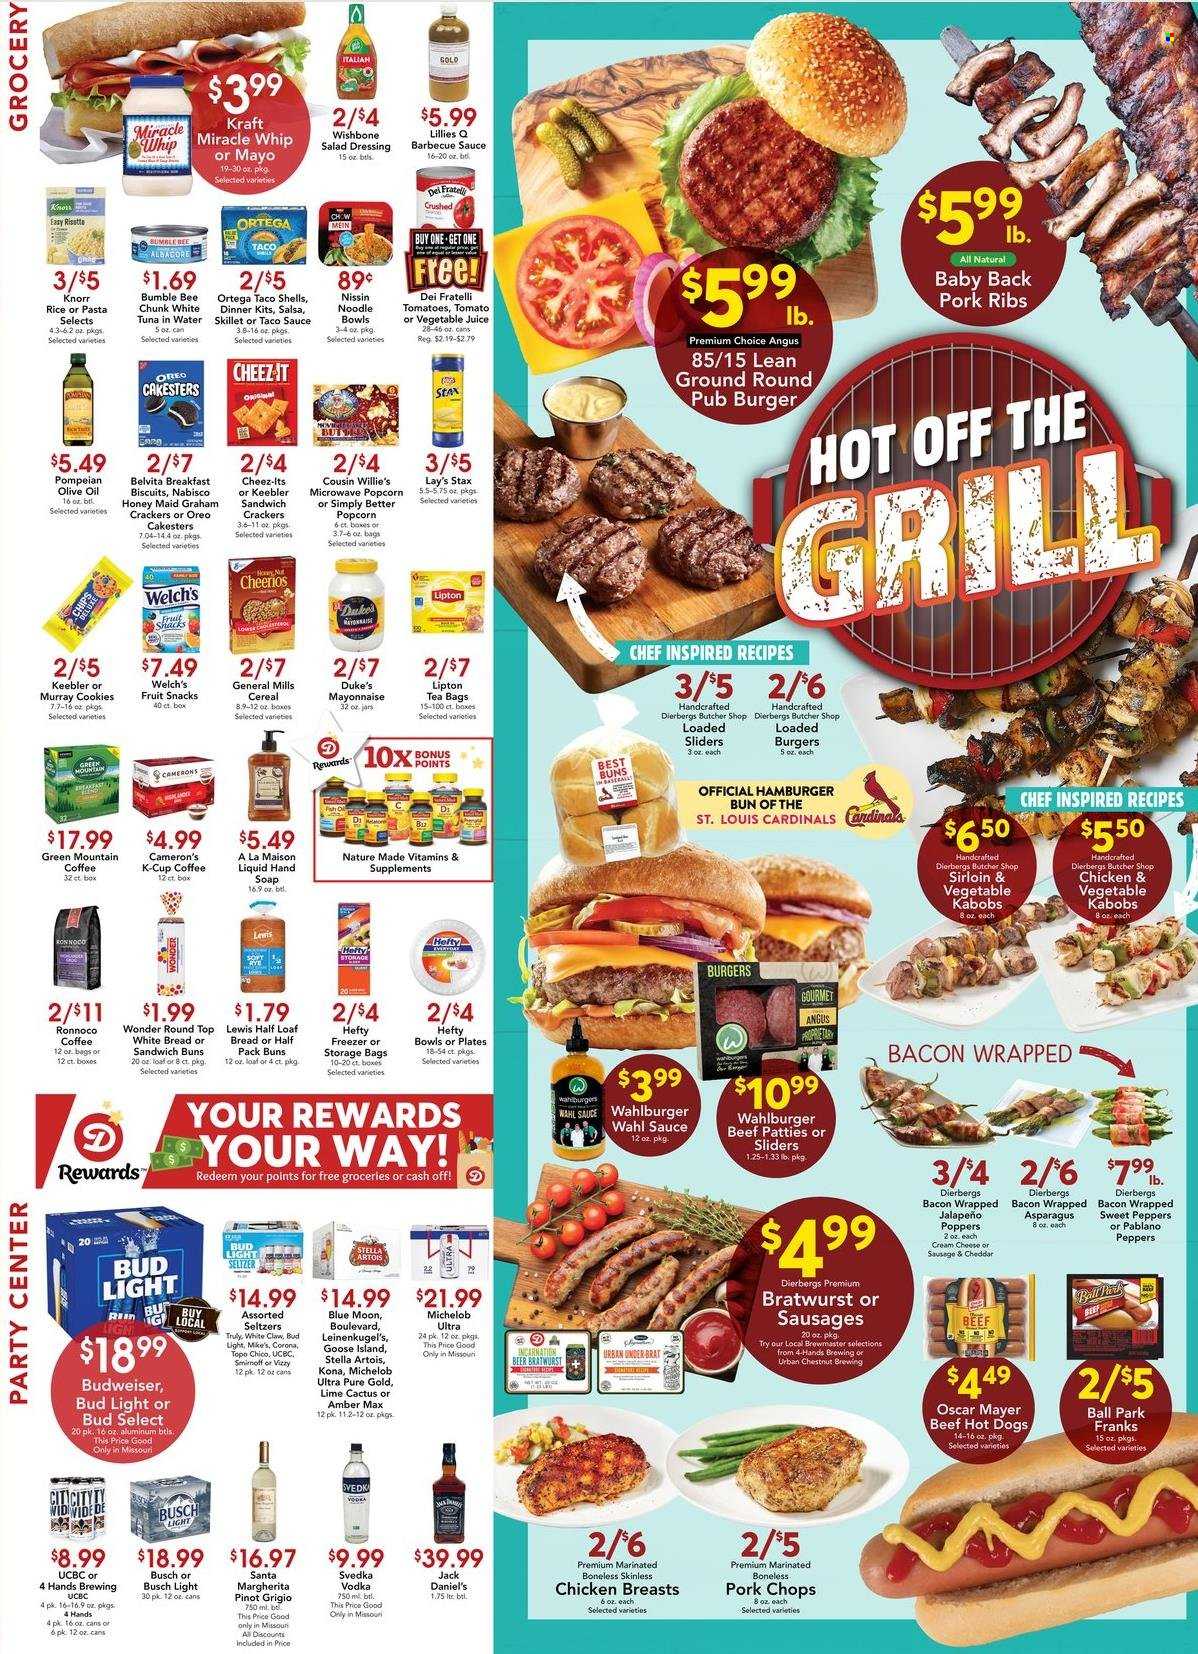 thumbnail - Dierbergs Flyer - 05/17/2022 - 05/23/2022 - Sales products - bread, white bread, buns, burger buns, asparagus, sweet peppers, peppers, jalapeño, Welch's, tuna, hot dog, Jack Daniel's, Bumble Bee, Knorr, sauce, dinner kit, noodles, Kraft®, Nissin, bacon, Oscar Mayer, bratwurst, sausage, Oreo, mayonnaise, Miracle Whip, cookies, graham crackers, crackers, Santa, fruit snack, Keebler, Lay’s, popcorn, tuna in water, cereals, Cheerios, belVita, Honey Maid, BBQ sauce, salad dressing, taco sauce, dressing, salsa, olive oil, oil, juice, Lipton, vegetable juice, tea bags, coffee, coffee capsules, K-Cups, Green Mountain, white wine, Pinot Grigio, vodka, White Claw, Hard Seltzer, TRULY, beer, Busch, Bud Light, Corona Extra, chicken breasts, pork chops, pork meat, pork ribs, pork back ribs, cactus, Nature Made, Budweiser, Leinenkugel's, Stella Artois, Blue Moon, Michelob. Page 2.